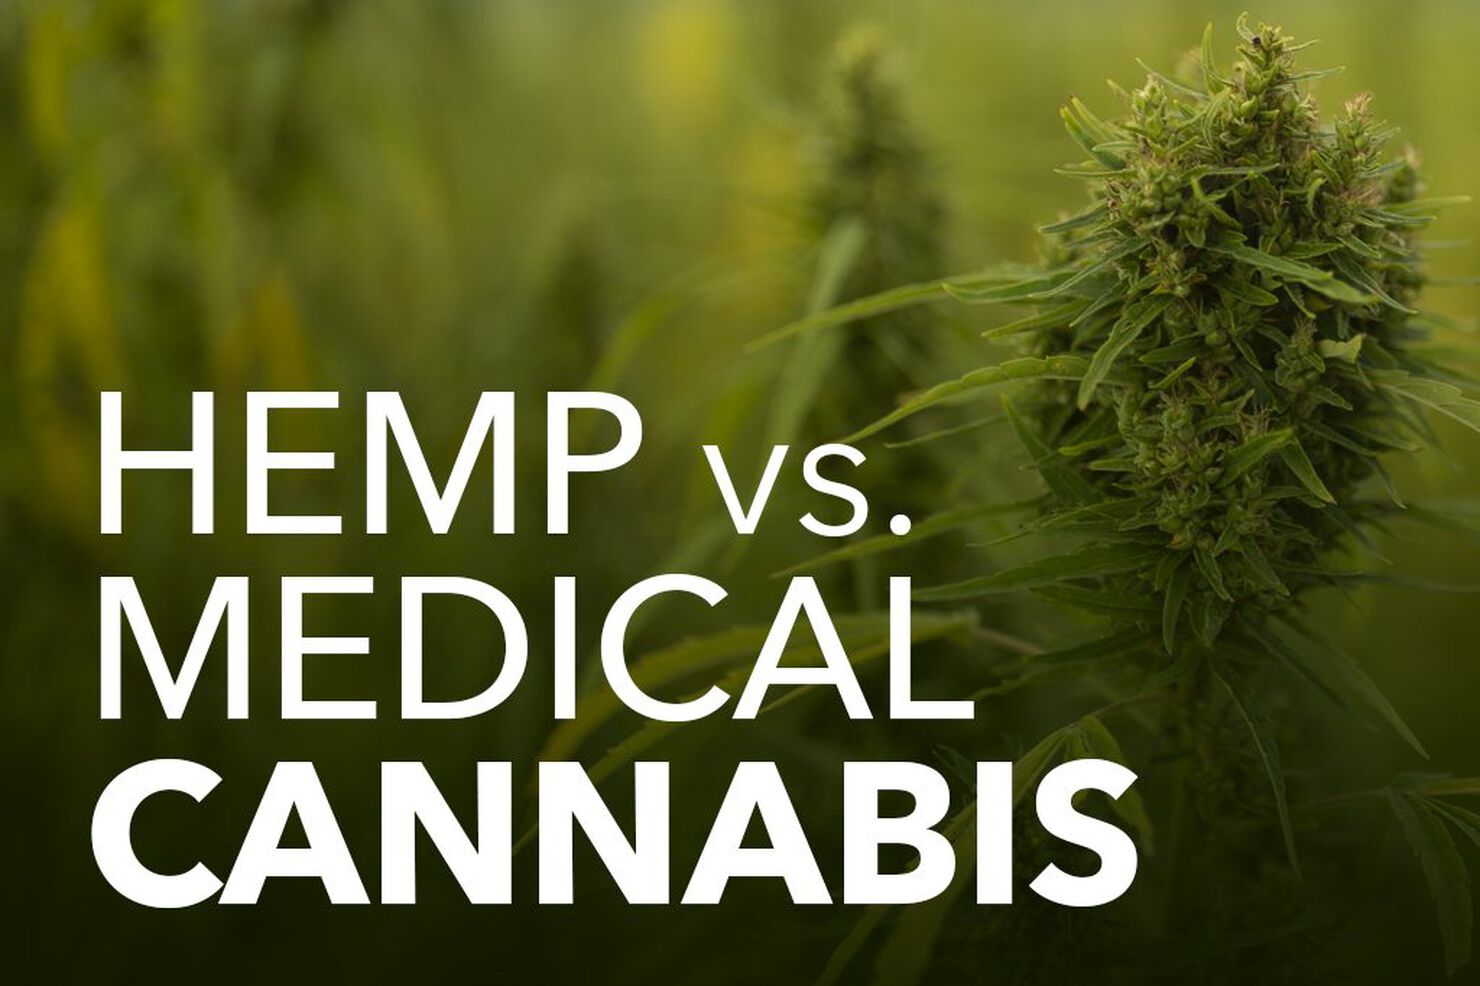 Hemp vs. Weed: What Is the Difference Between Hemp & Medical Cannabis?